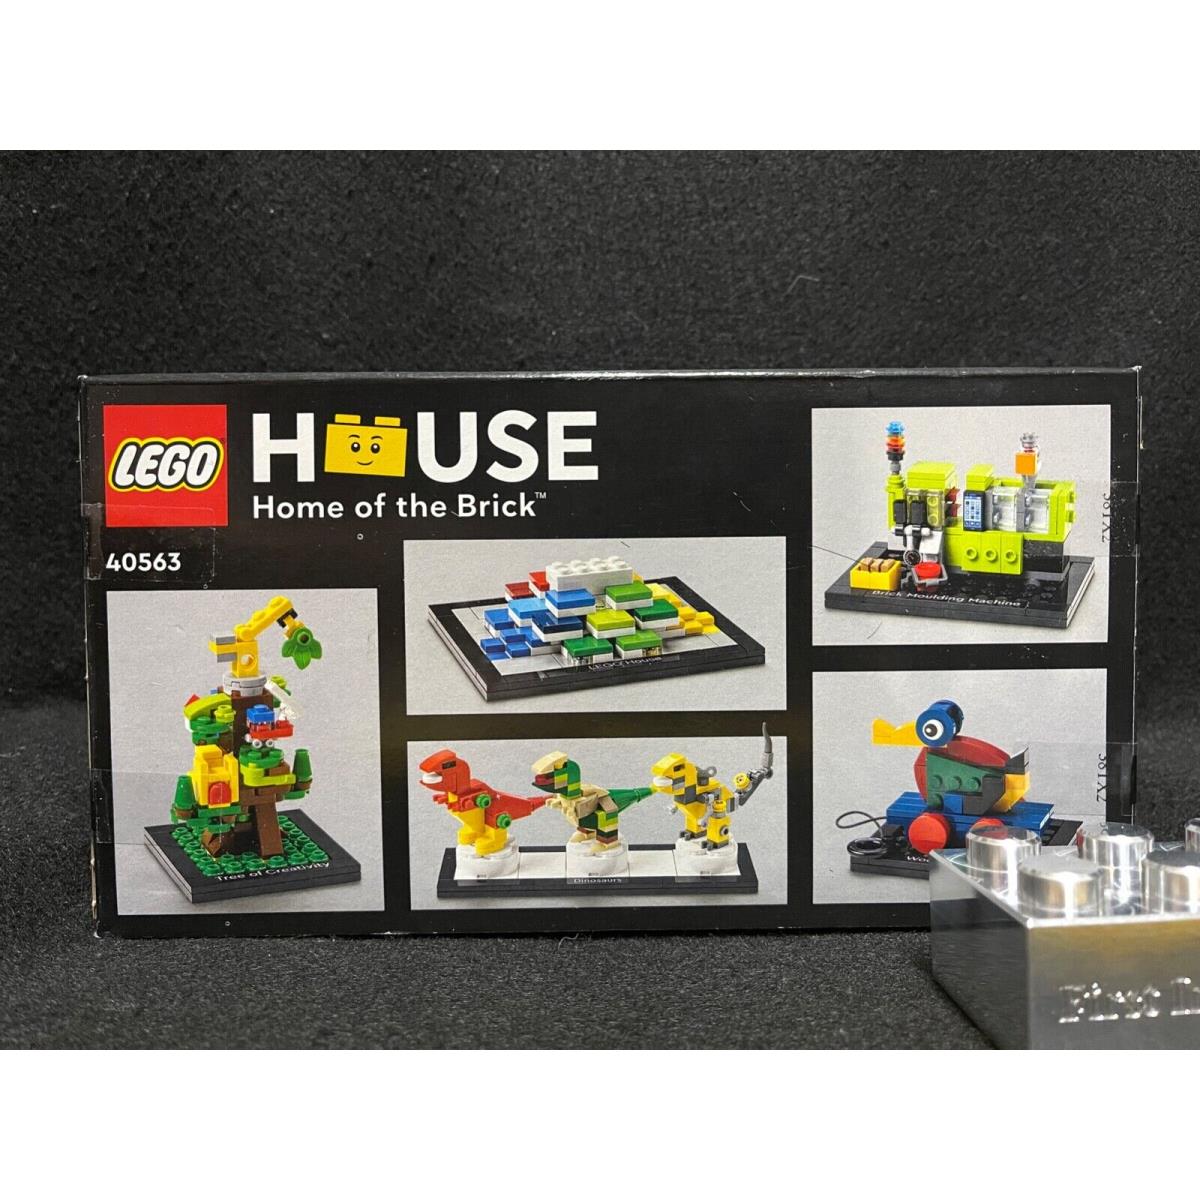 Lego 40563 2022 Home of The Brick Tribute to Lego House Promotional Htf Limited